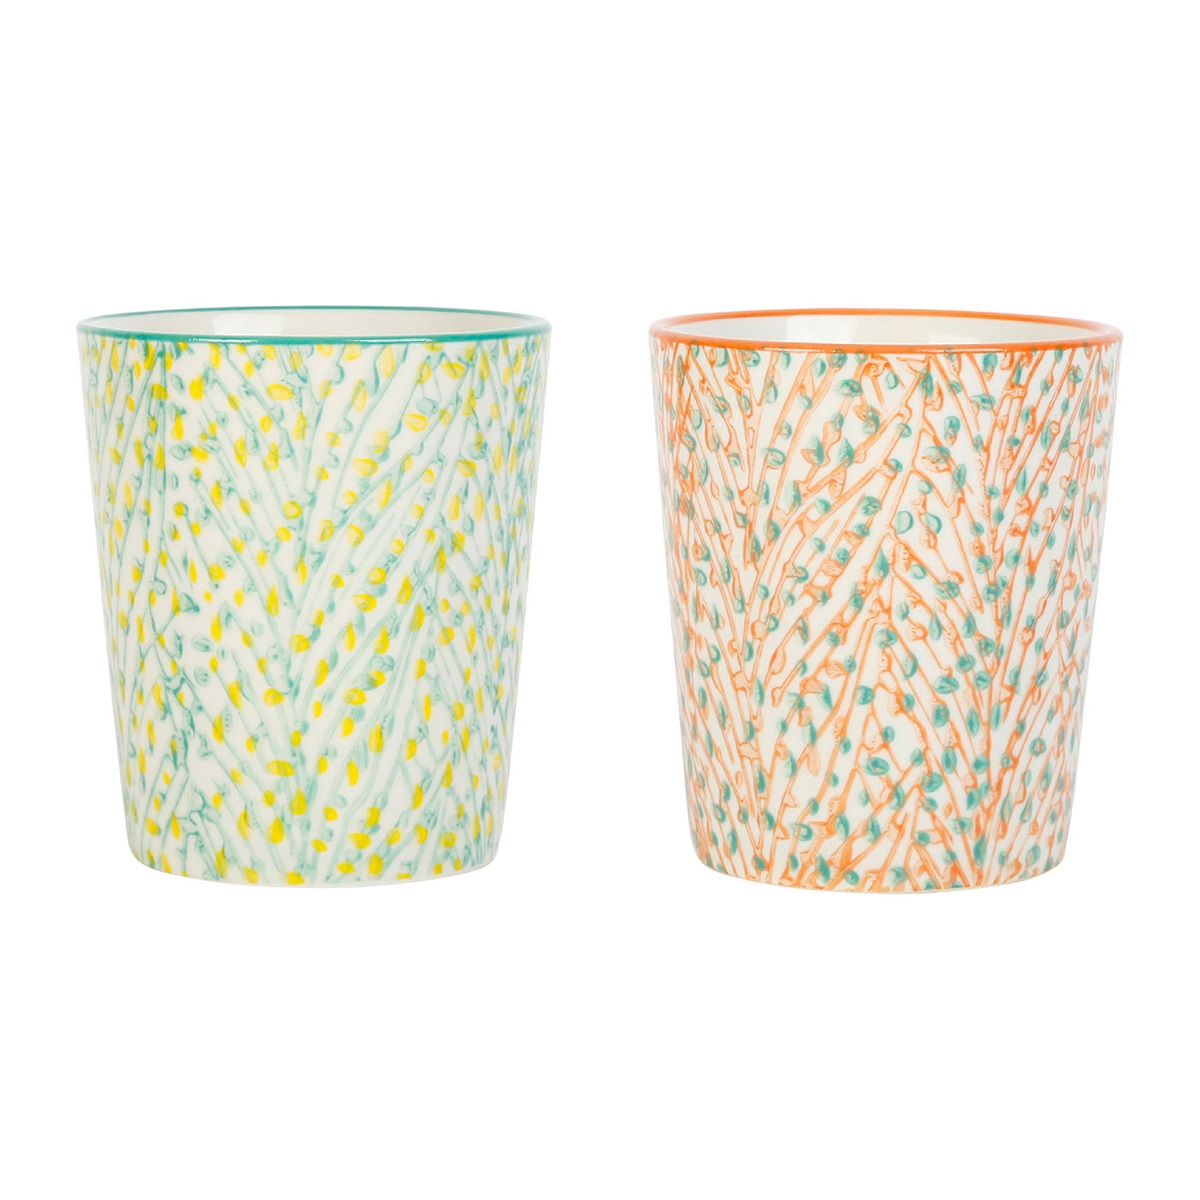 Tumbler Coral & Turquoise - set of 2